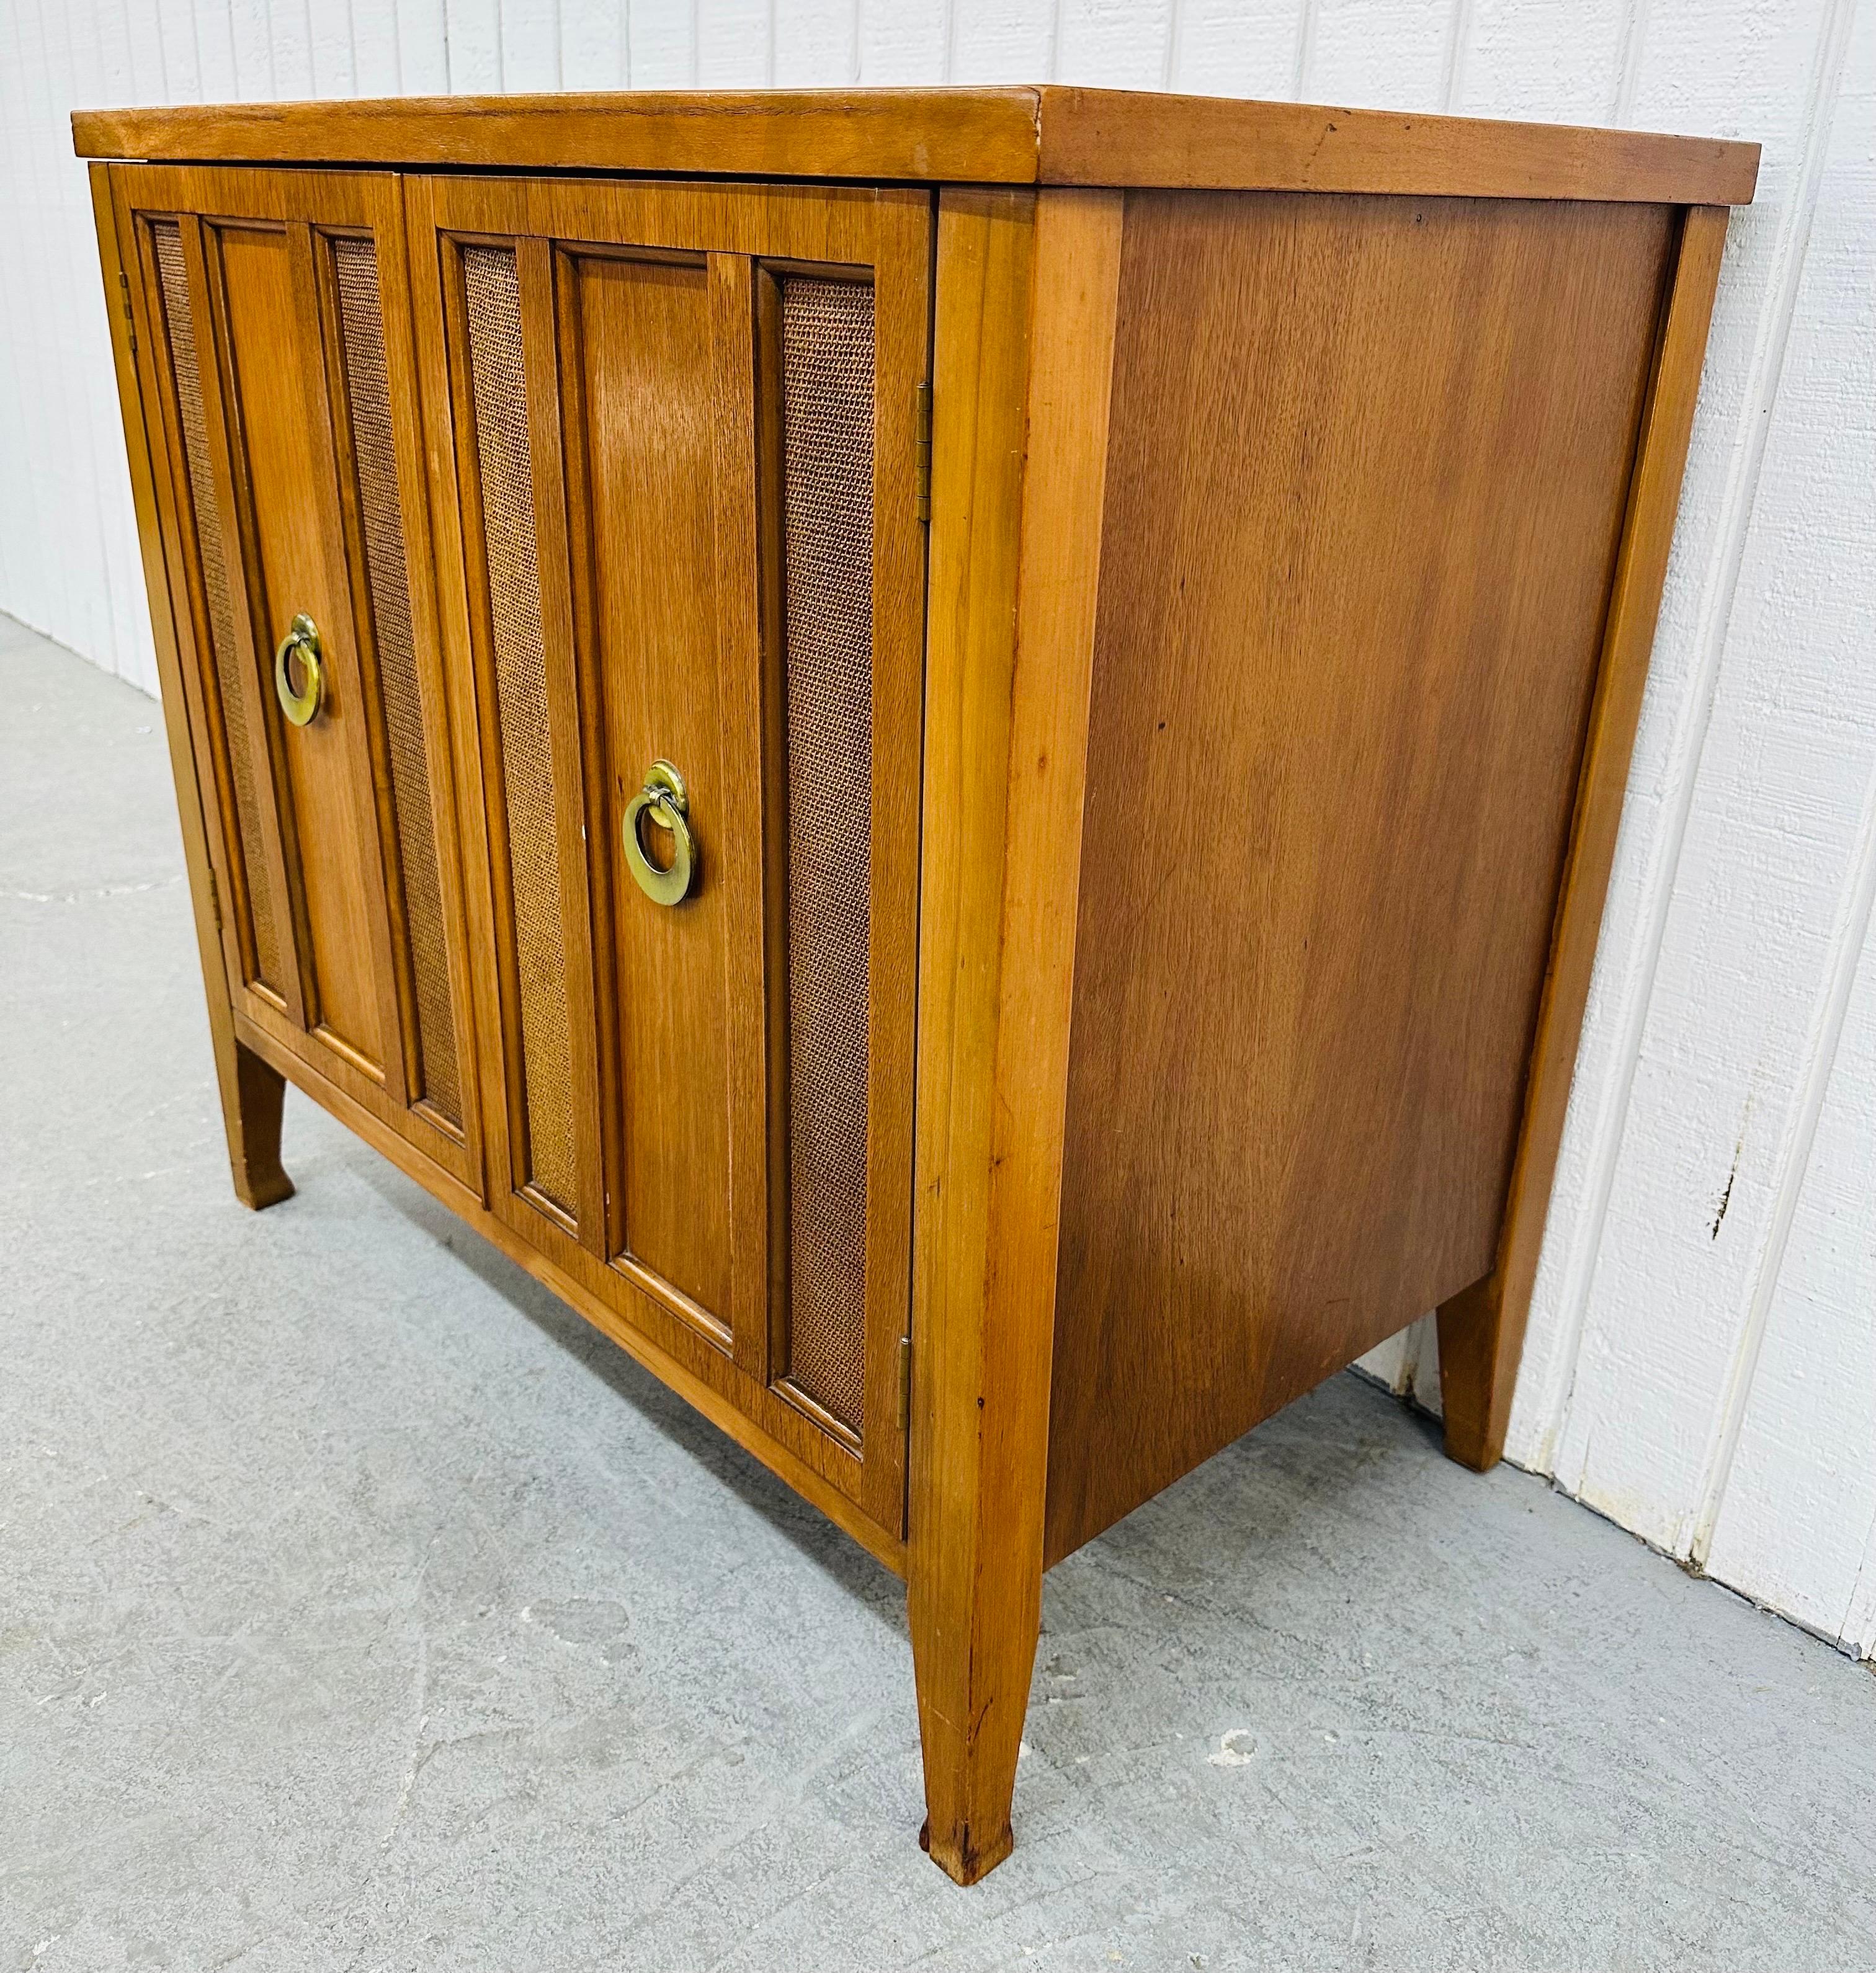 This listing is for a Mid-Century Modern Walnut Storage Cabinet. Featuring a straight line design, rectangular top, two doors with original brass pulls, cane lined doors, modern legs, and a beautiful walnut finish. This is an exceptional combination